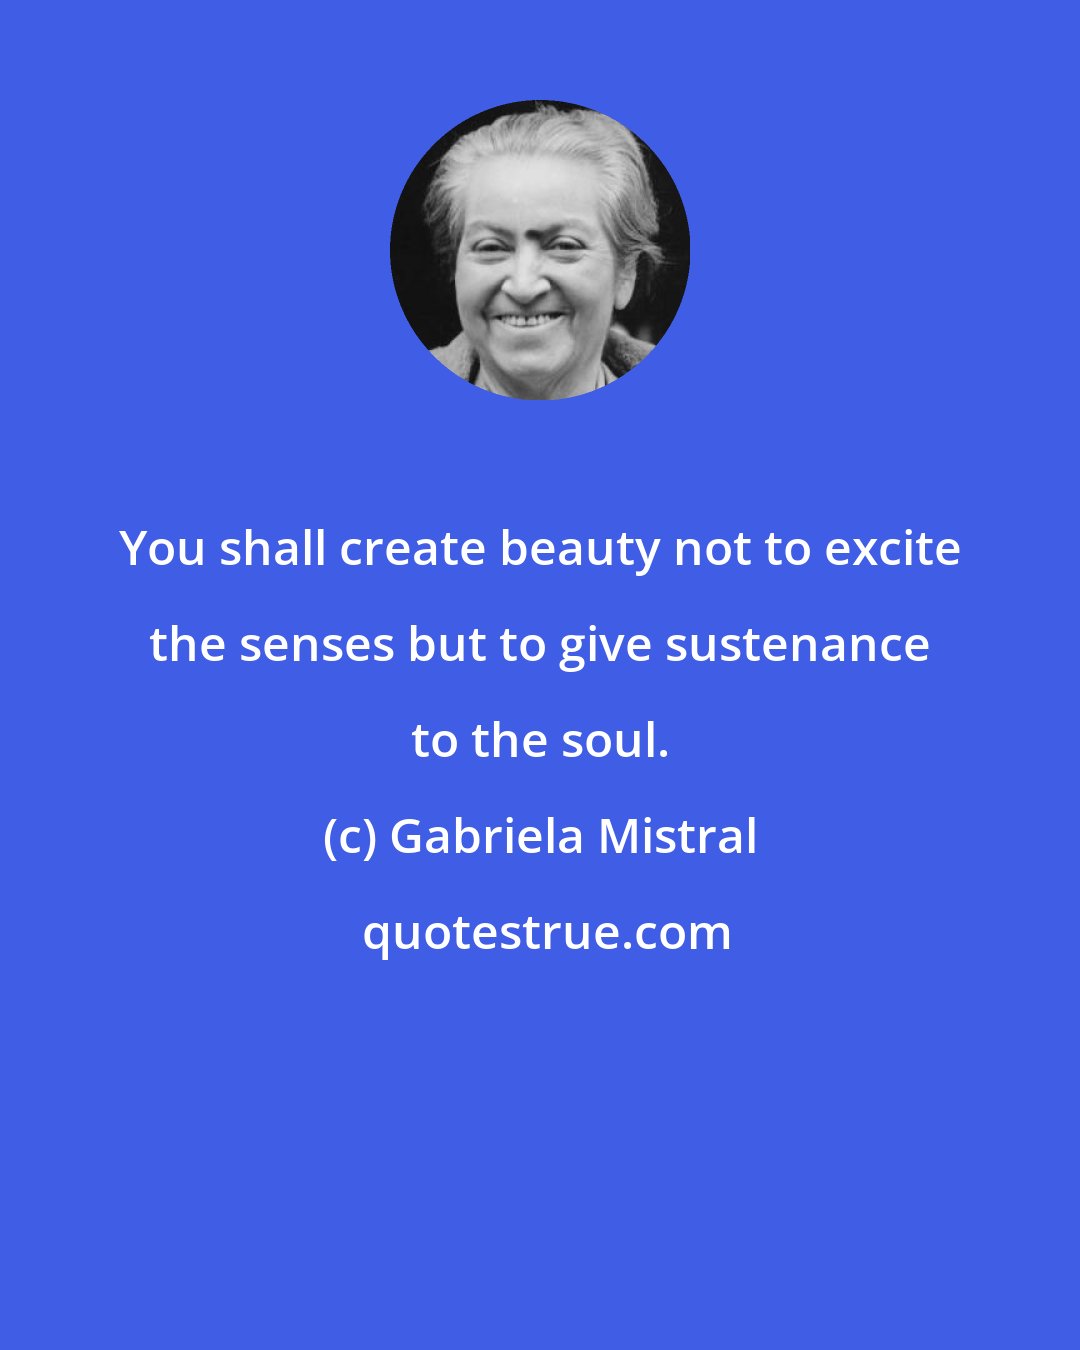 Gabriela Mistral: You shall create beauty not to excite the senses but to give sustenance to the soul.